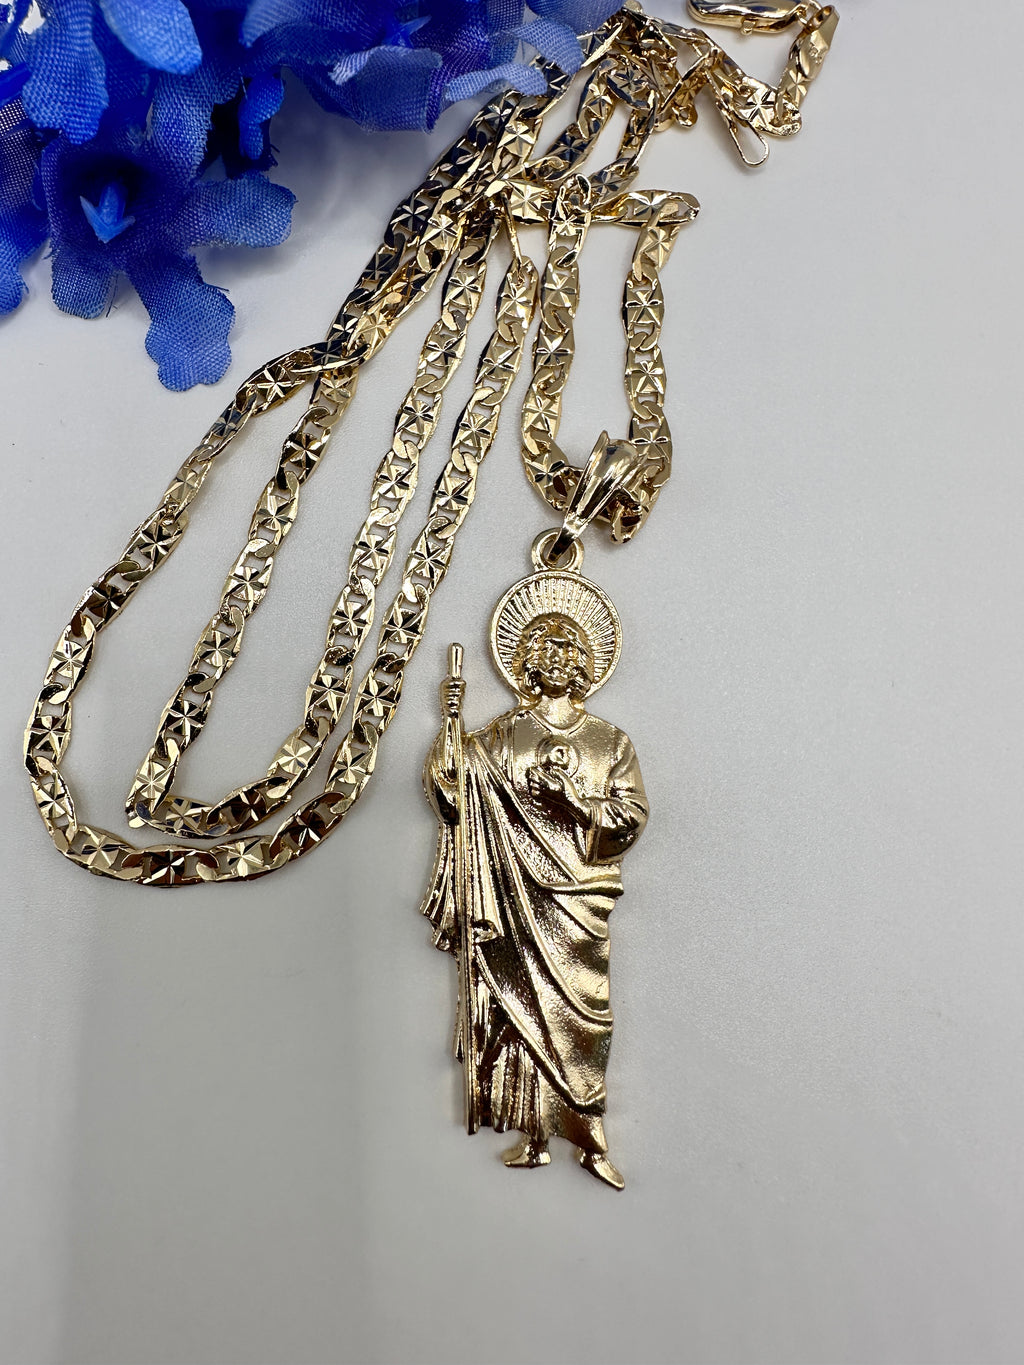 "Miracle" Saint Jude Necklace Gold Plated . (San Judas)